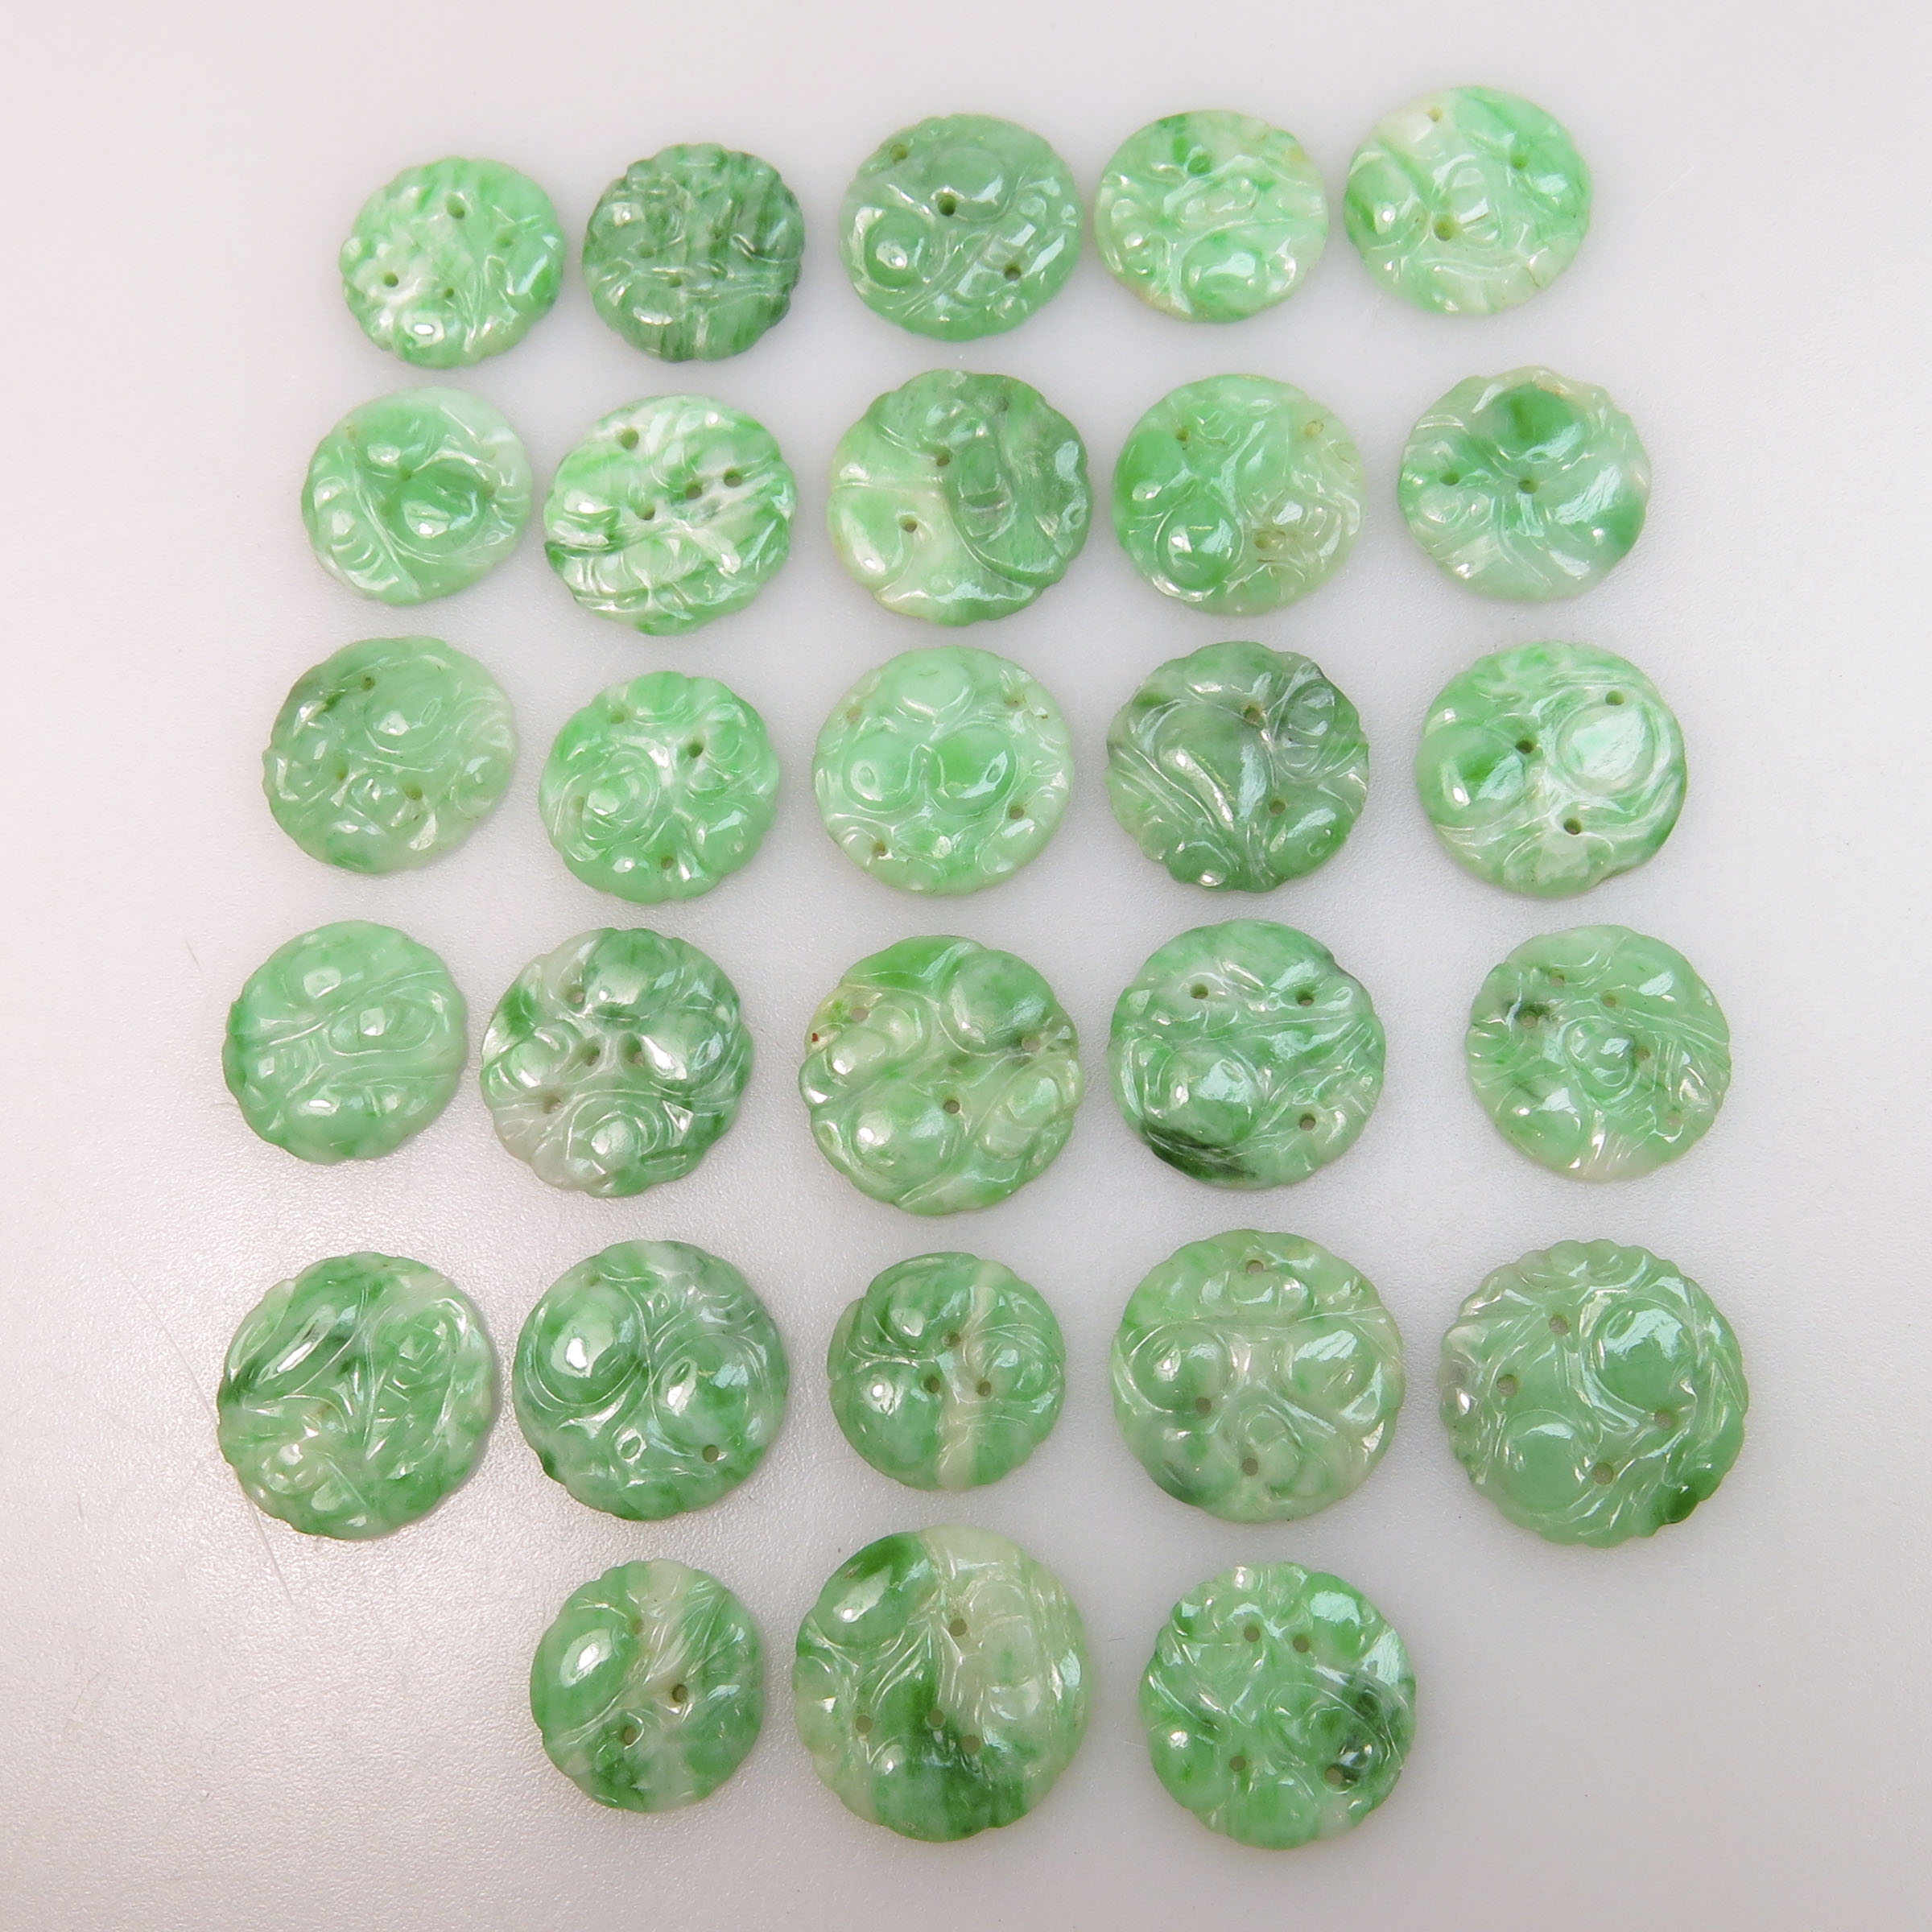 28 Carved And Pierced Circular Jadeite Panels